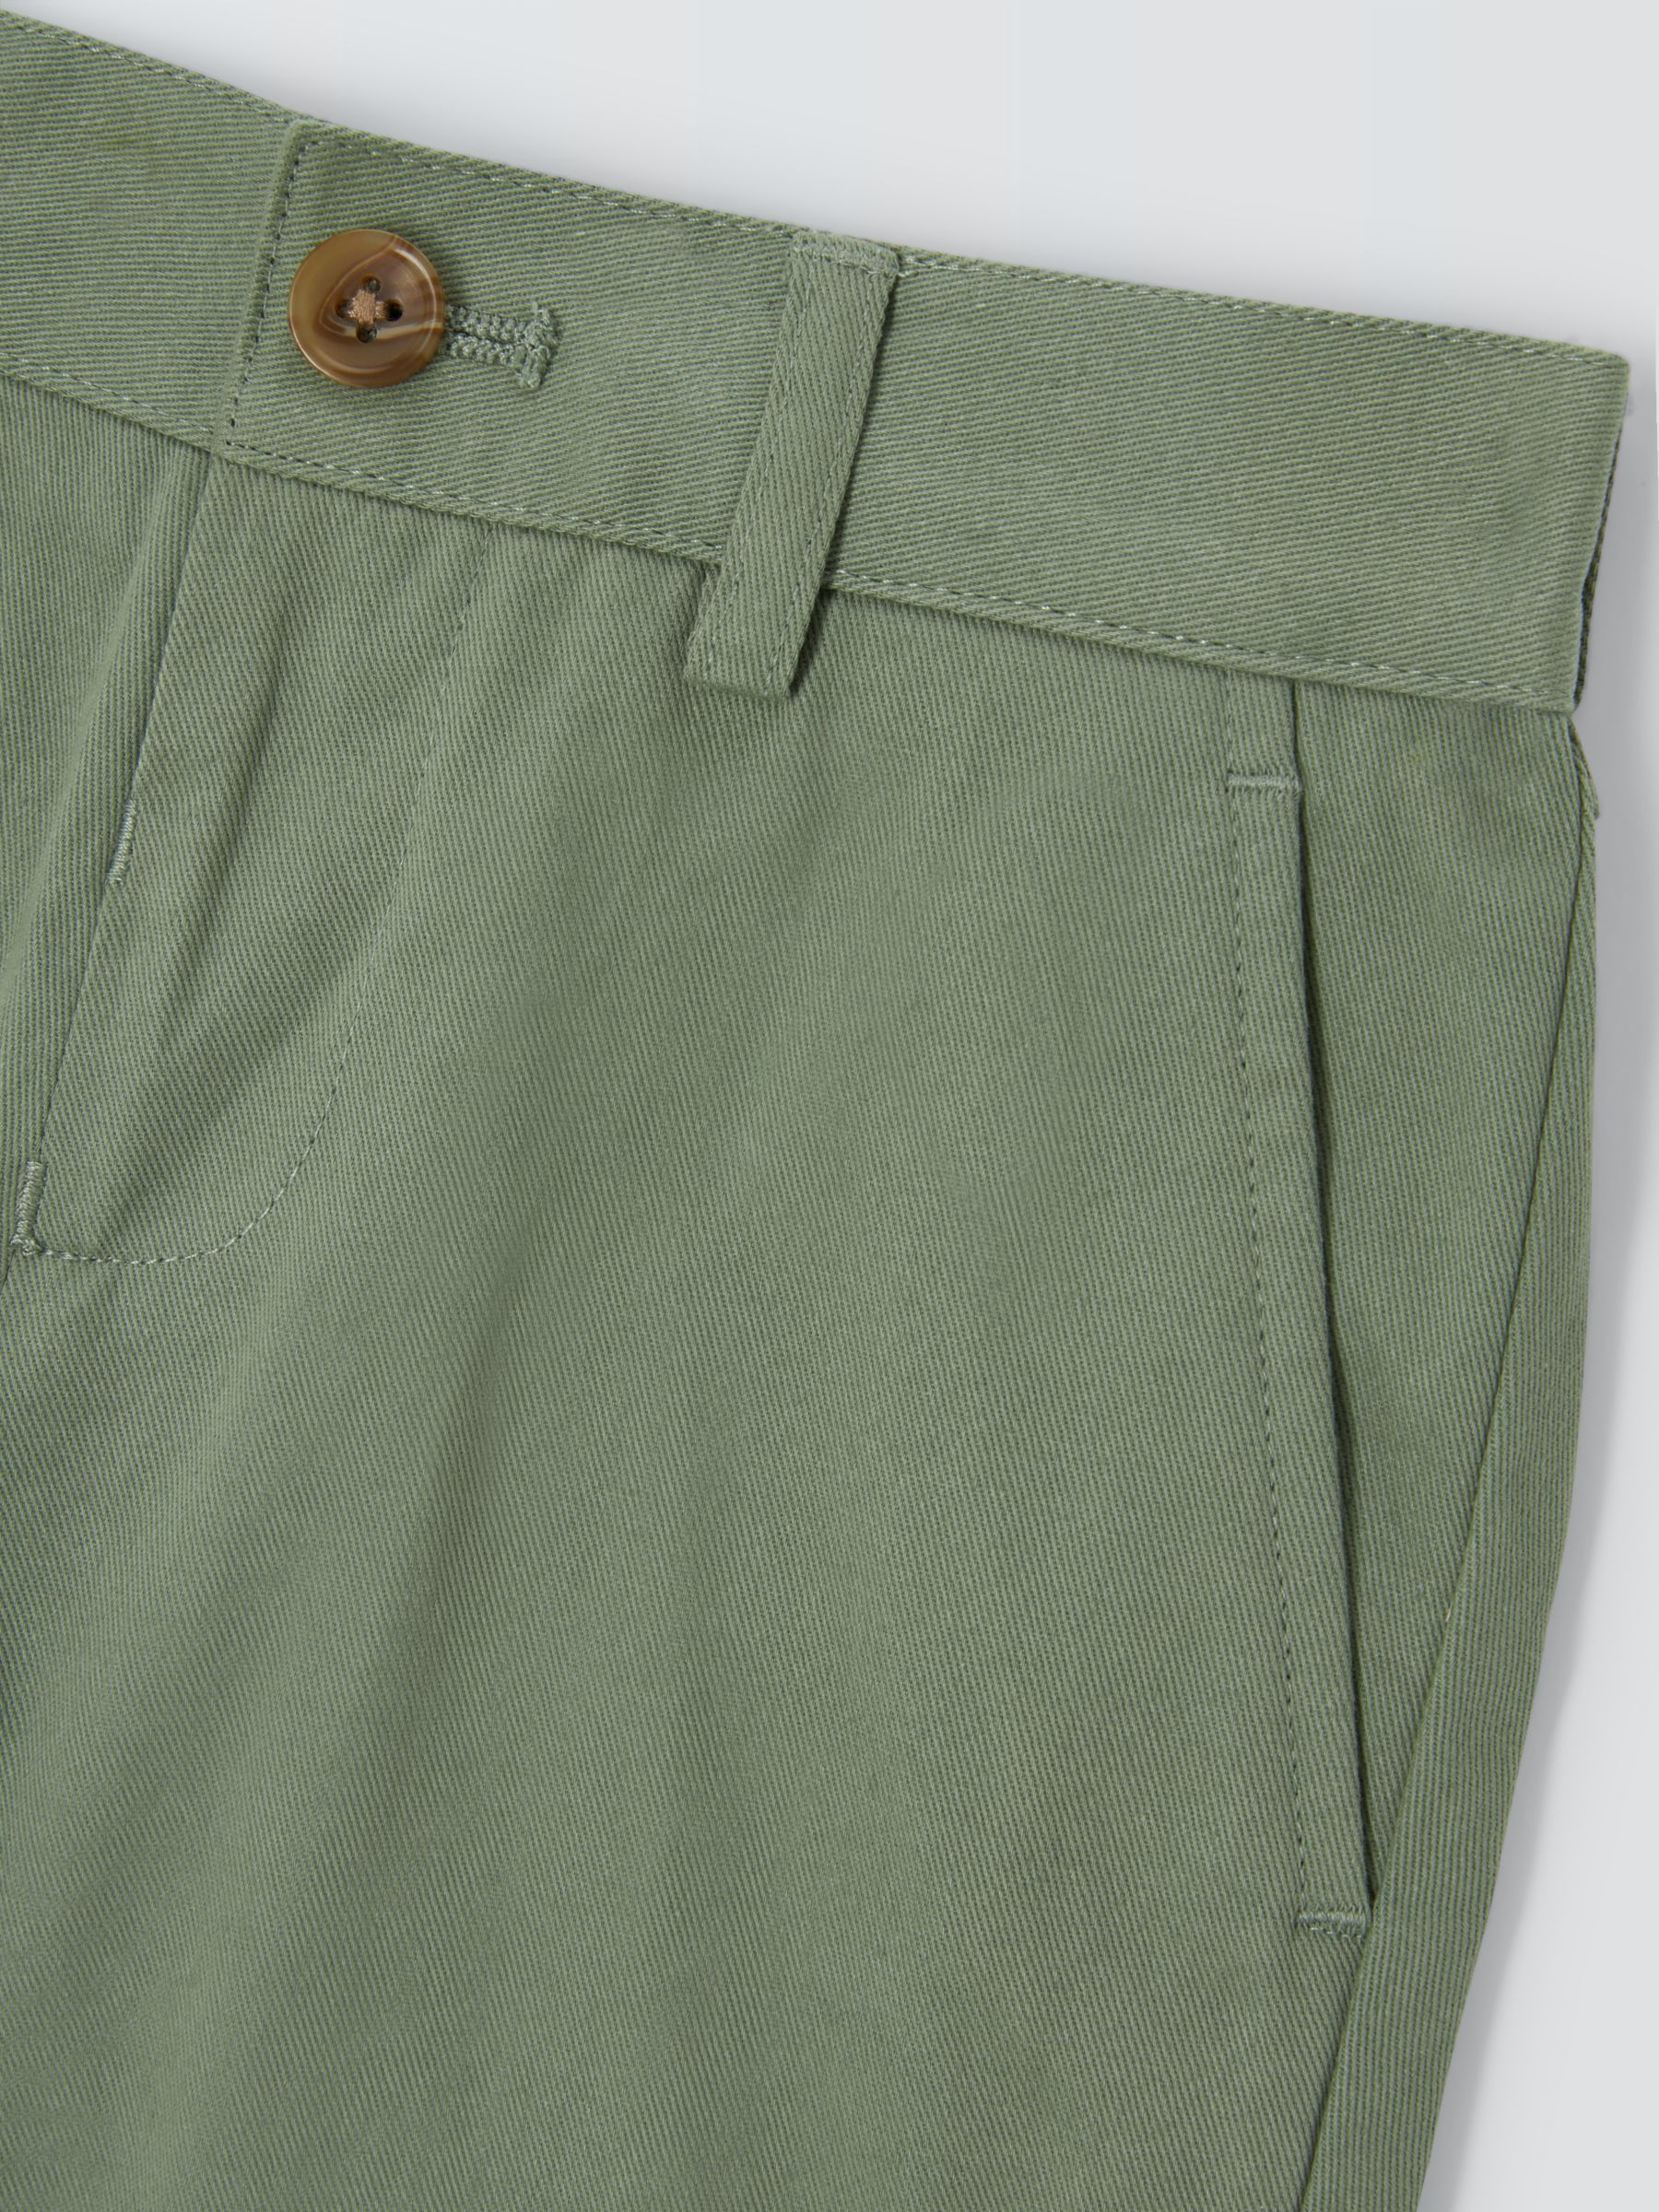 John Lewis Heirloom Collection Kids' Chino Shorts, Green, 13 years